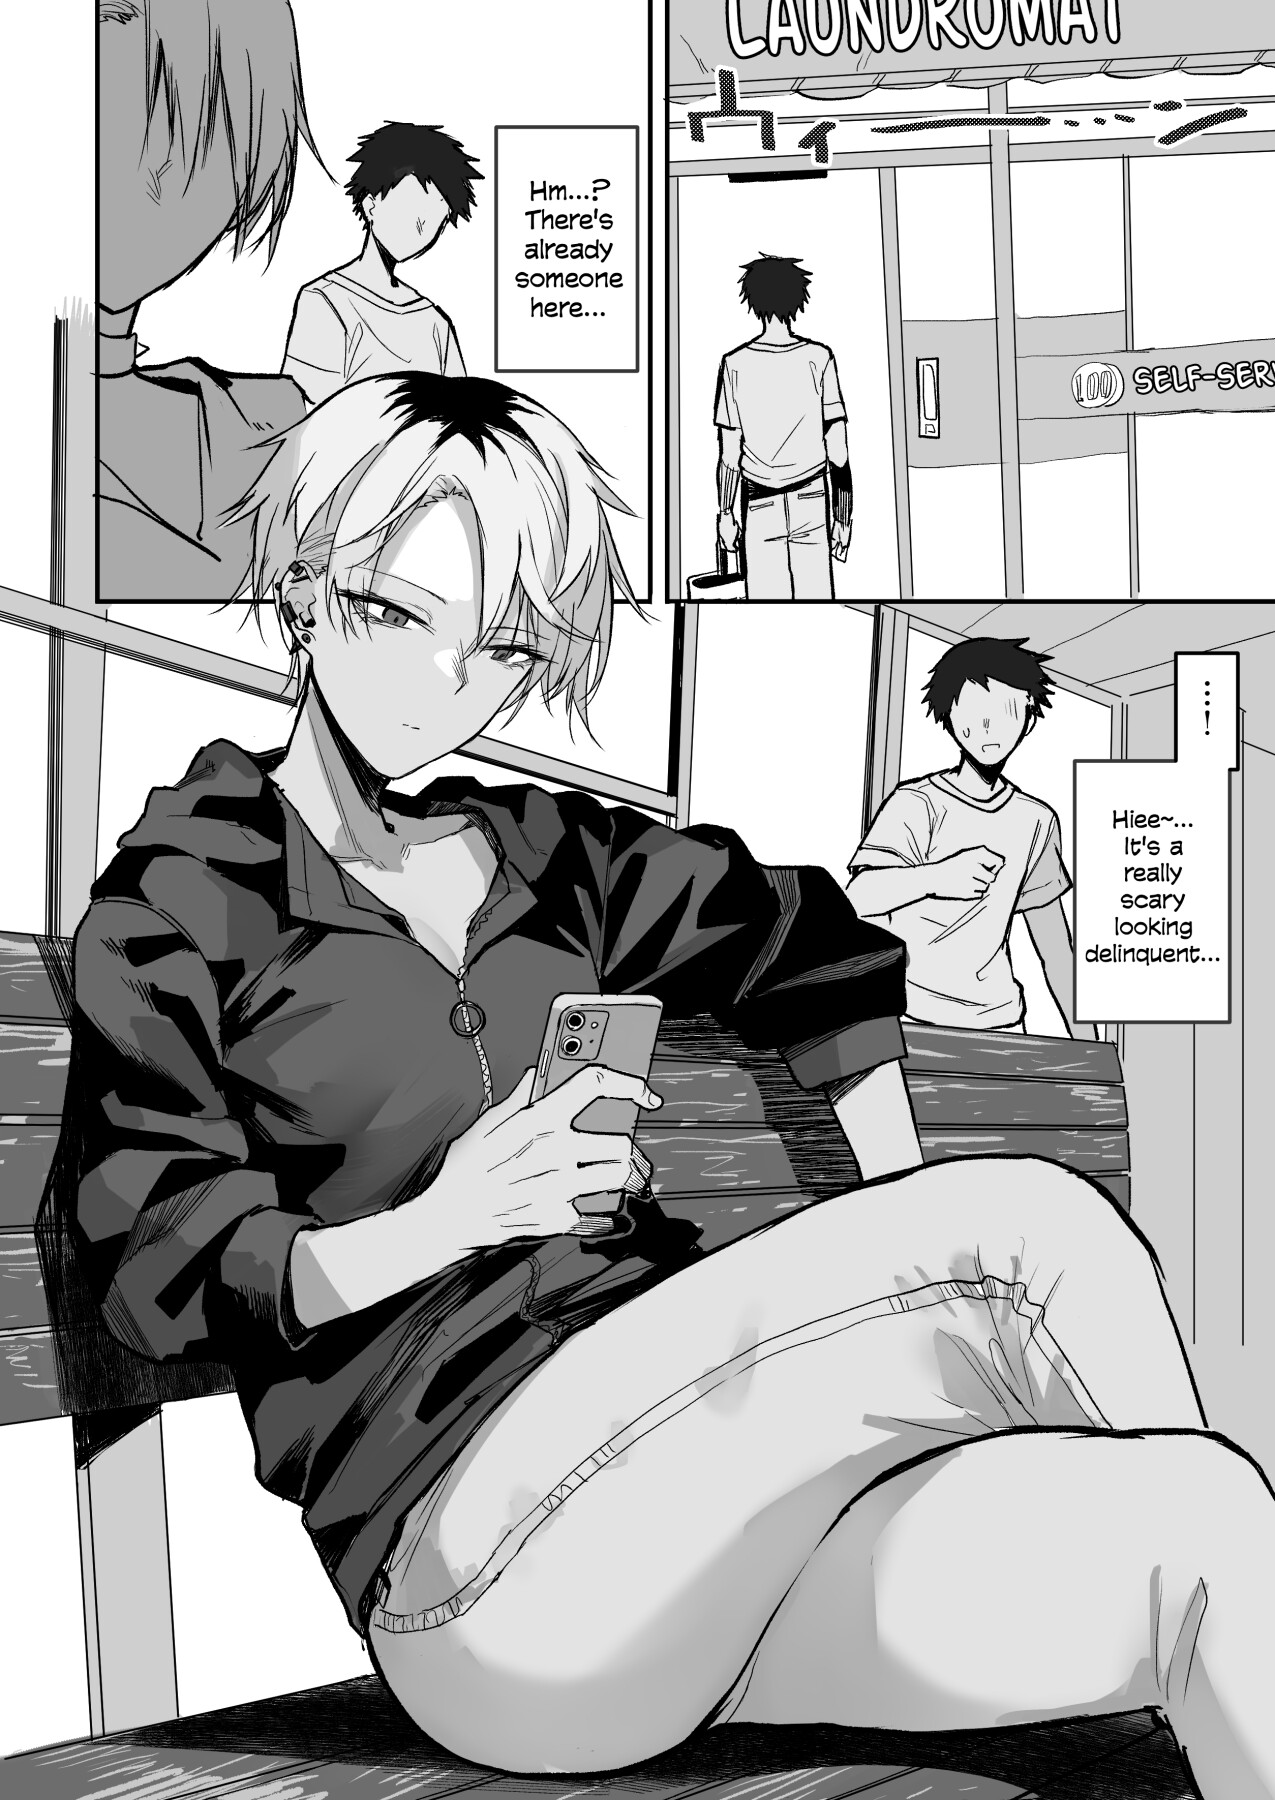 Hentai Manga Comic-A Manga About Getting Mixed Up With A Scary Delinquent At The Laundromat-Read-1